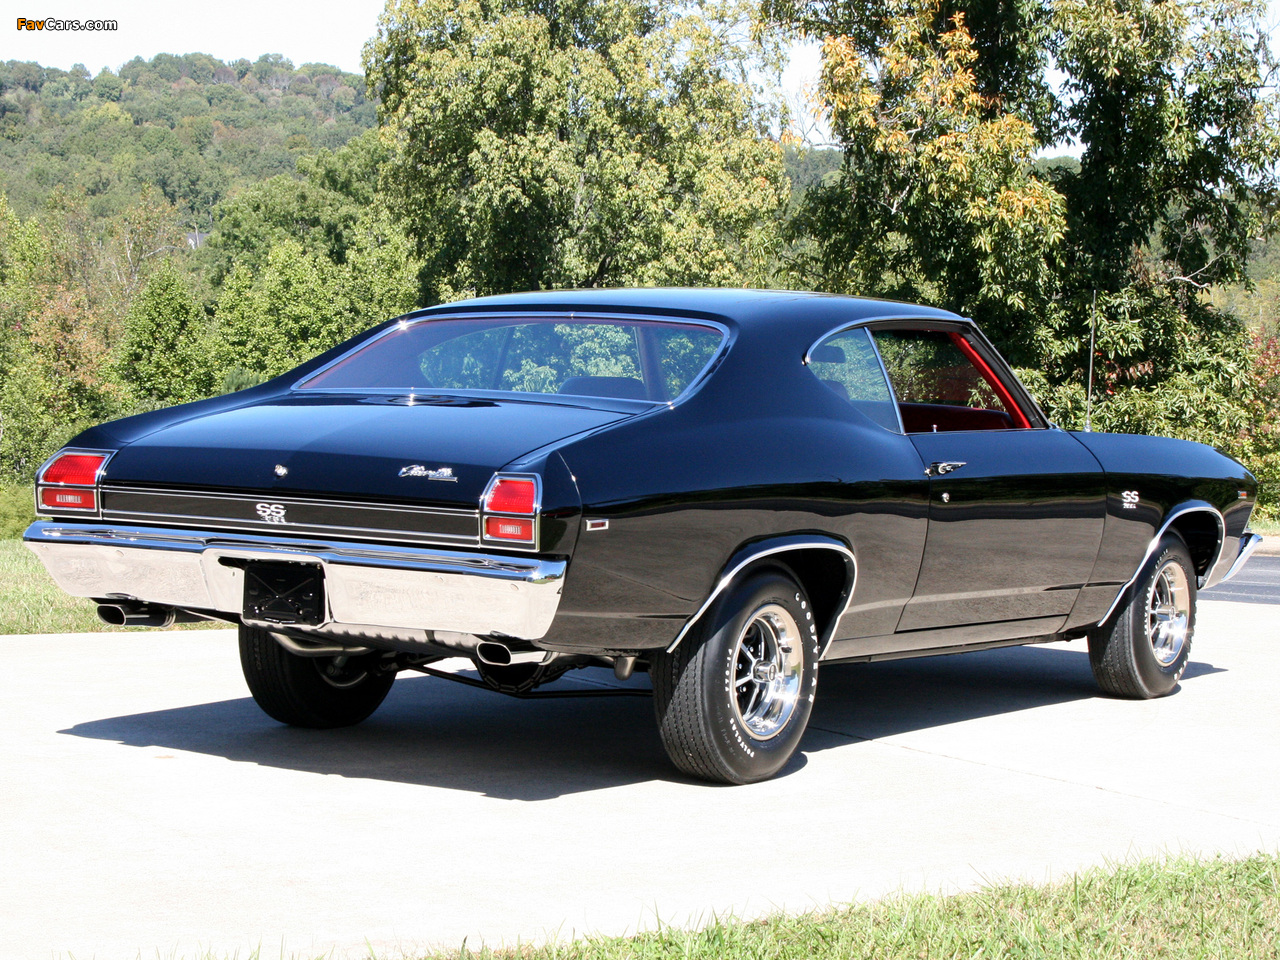 Images of Chevrolet Chevelle SS 396 Hardtop Coupe 1969 (1280 x 960)